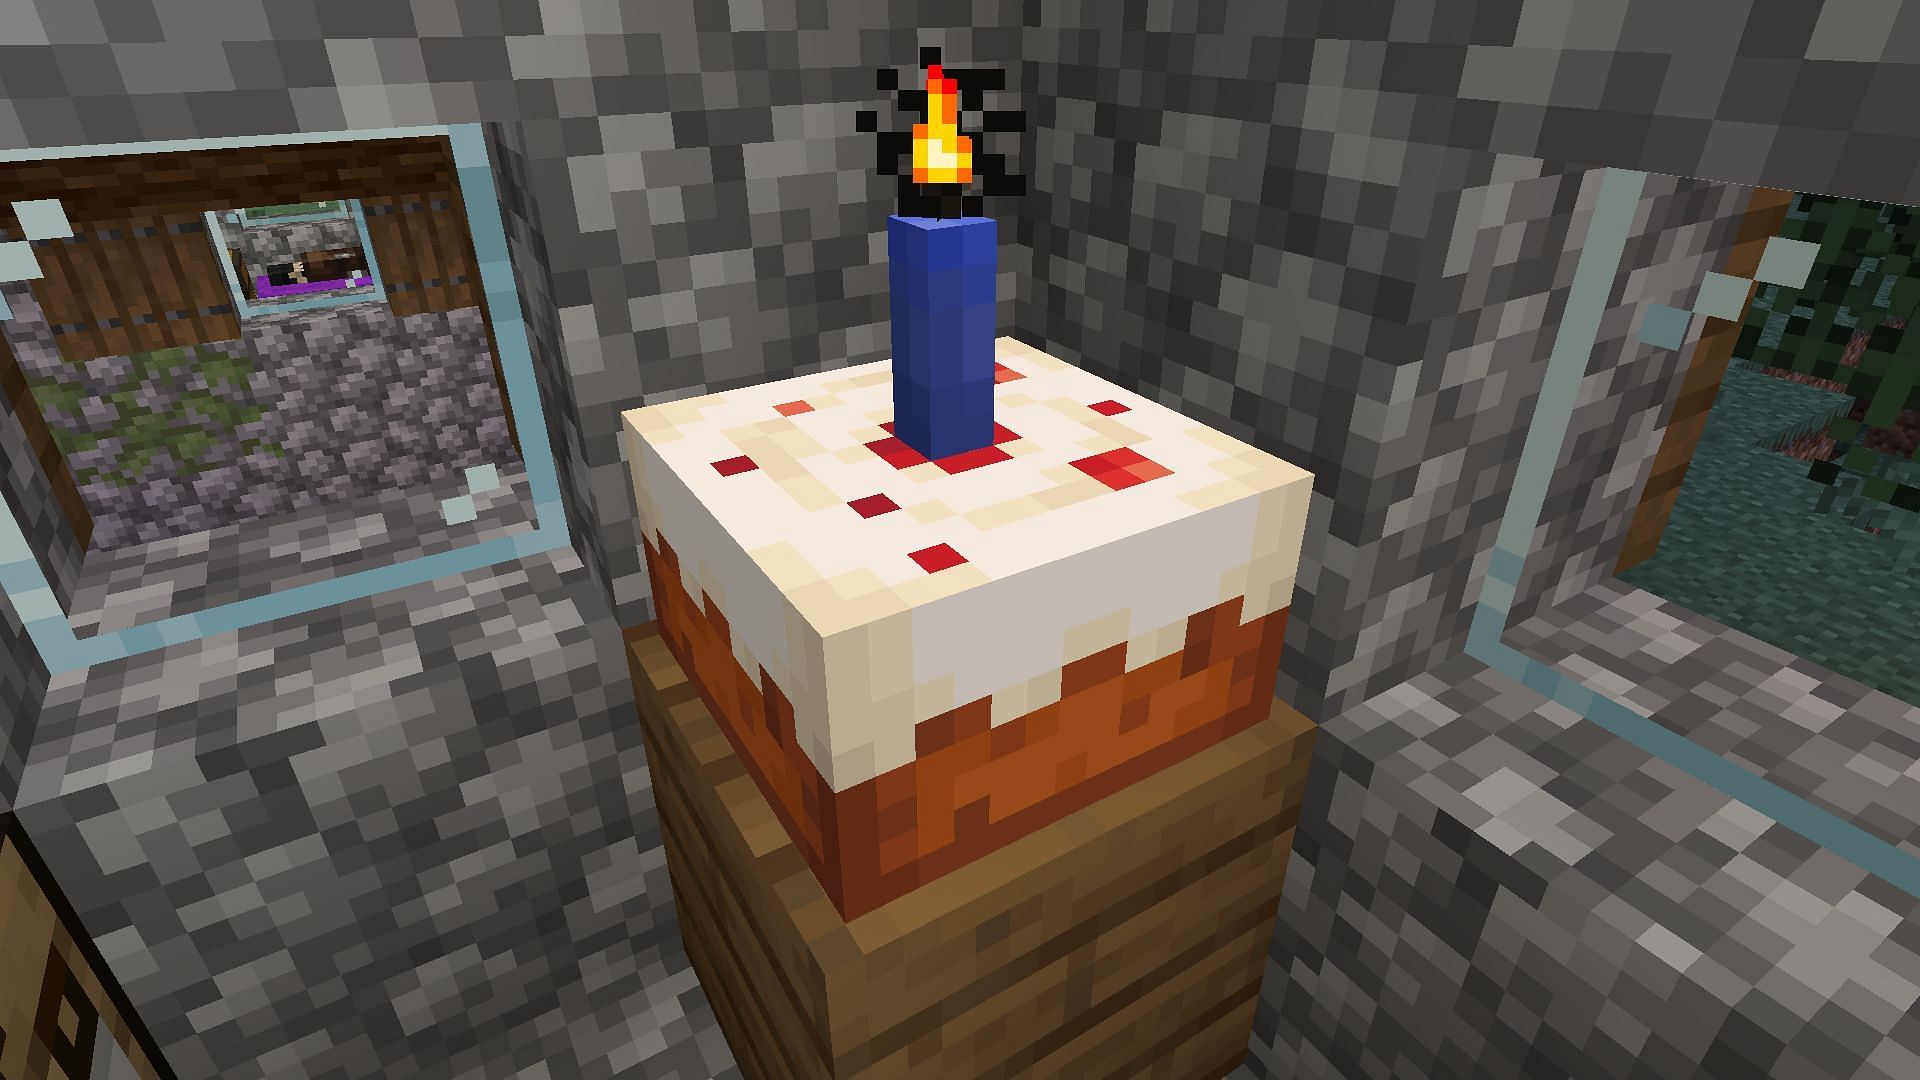 A single stick can be placed on a cake (Image via Minecraft)